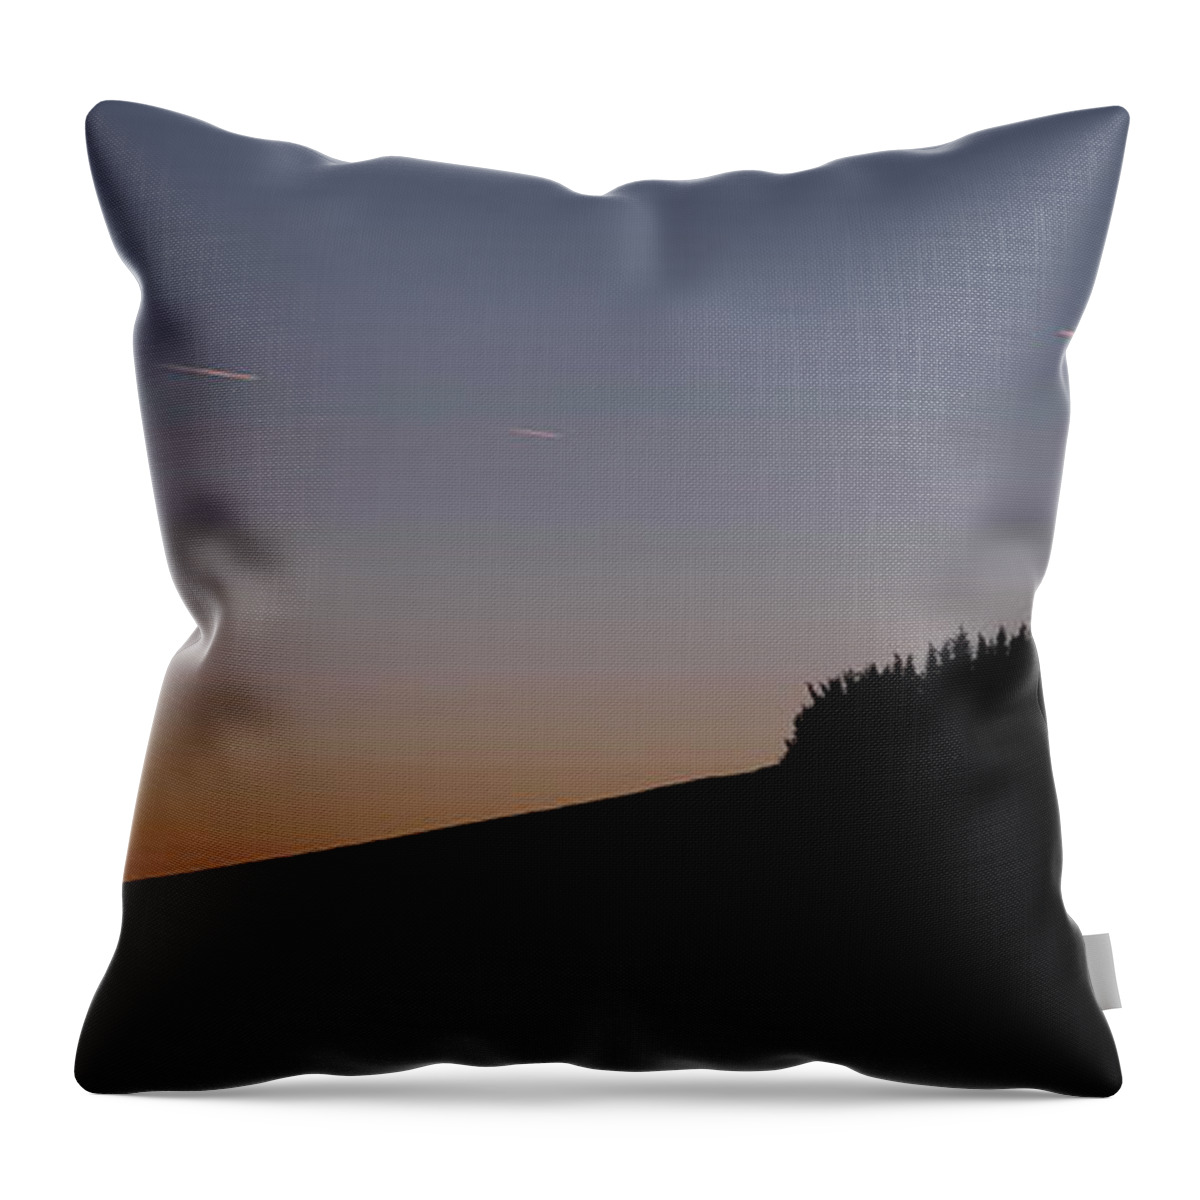 Panspermia Throw Pillow featuring the photograph Panspermia by Karine GADRE